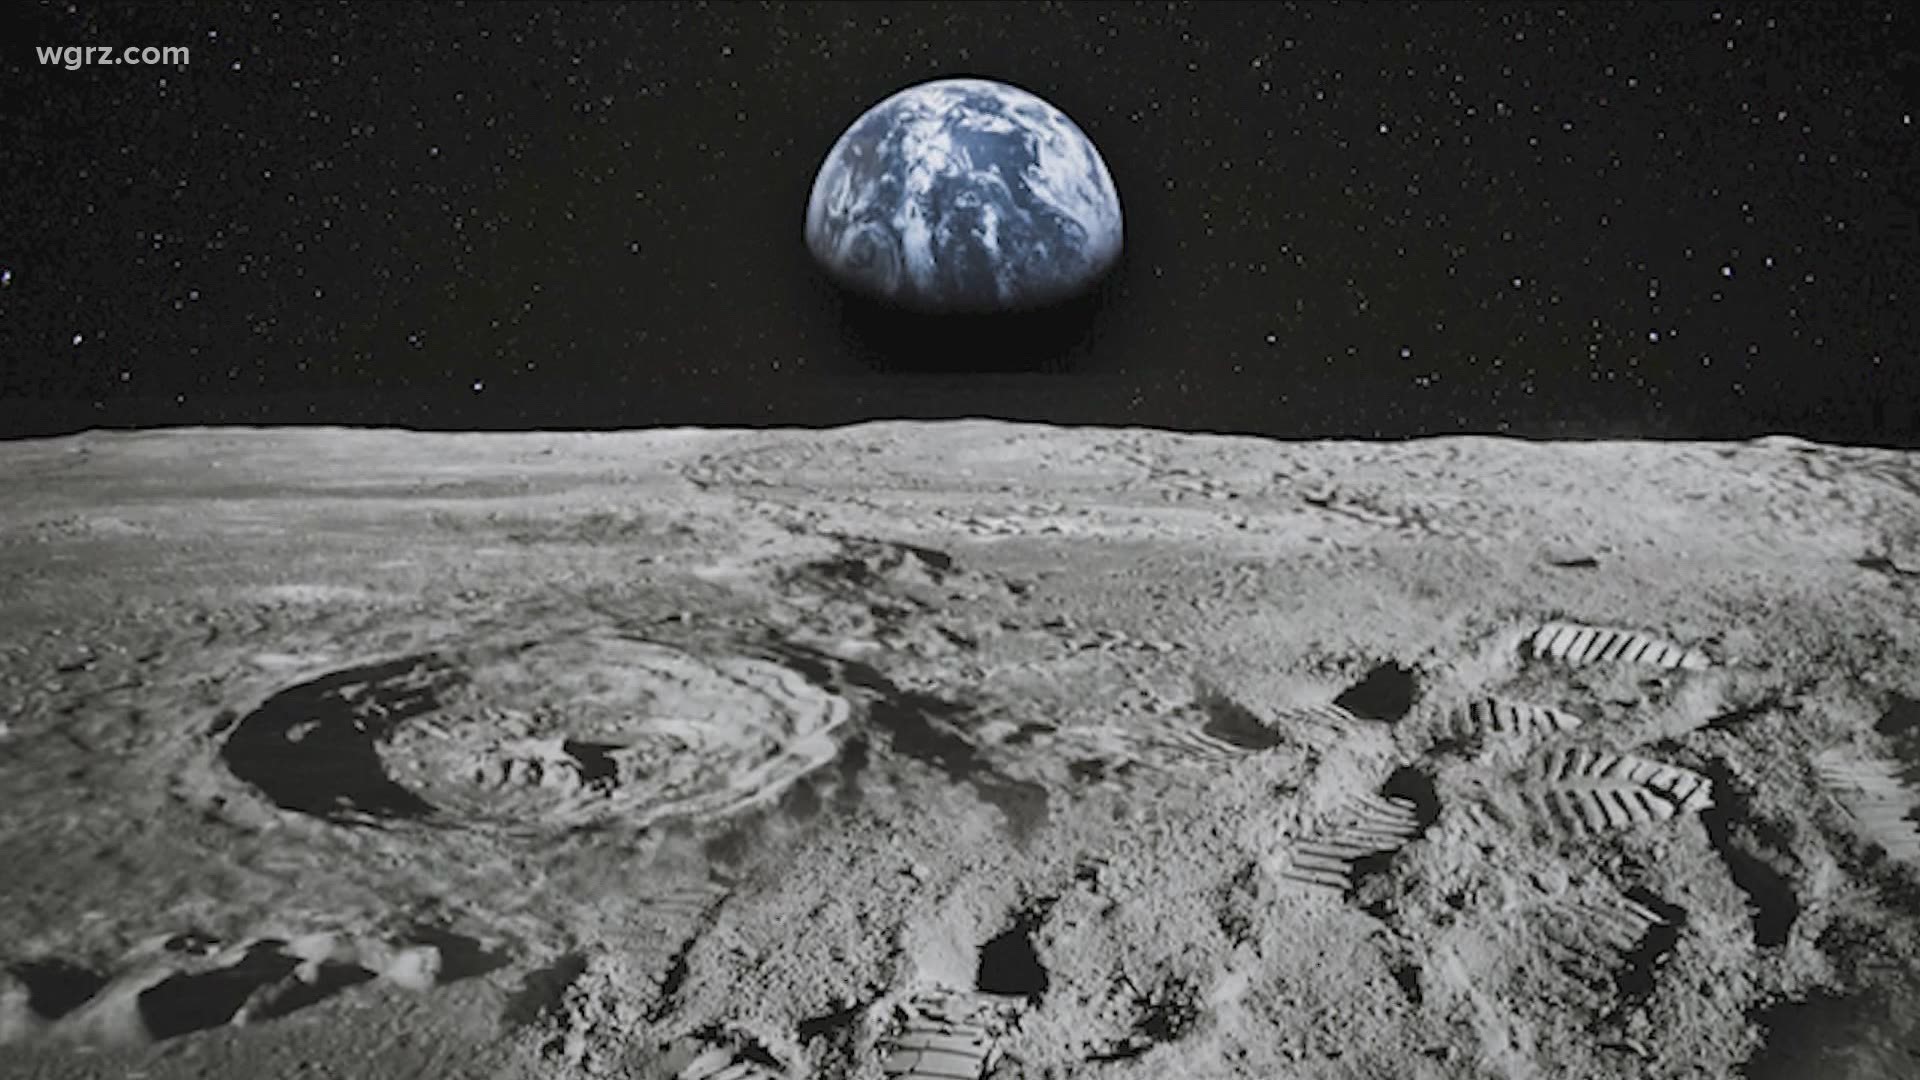 NASA now say they discovered more water on the moon, but not where scientists expected to find it.